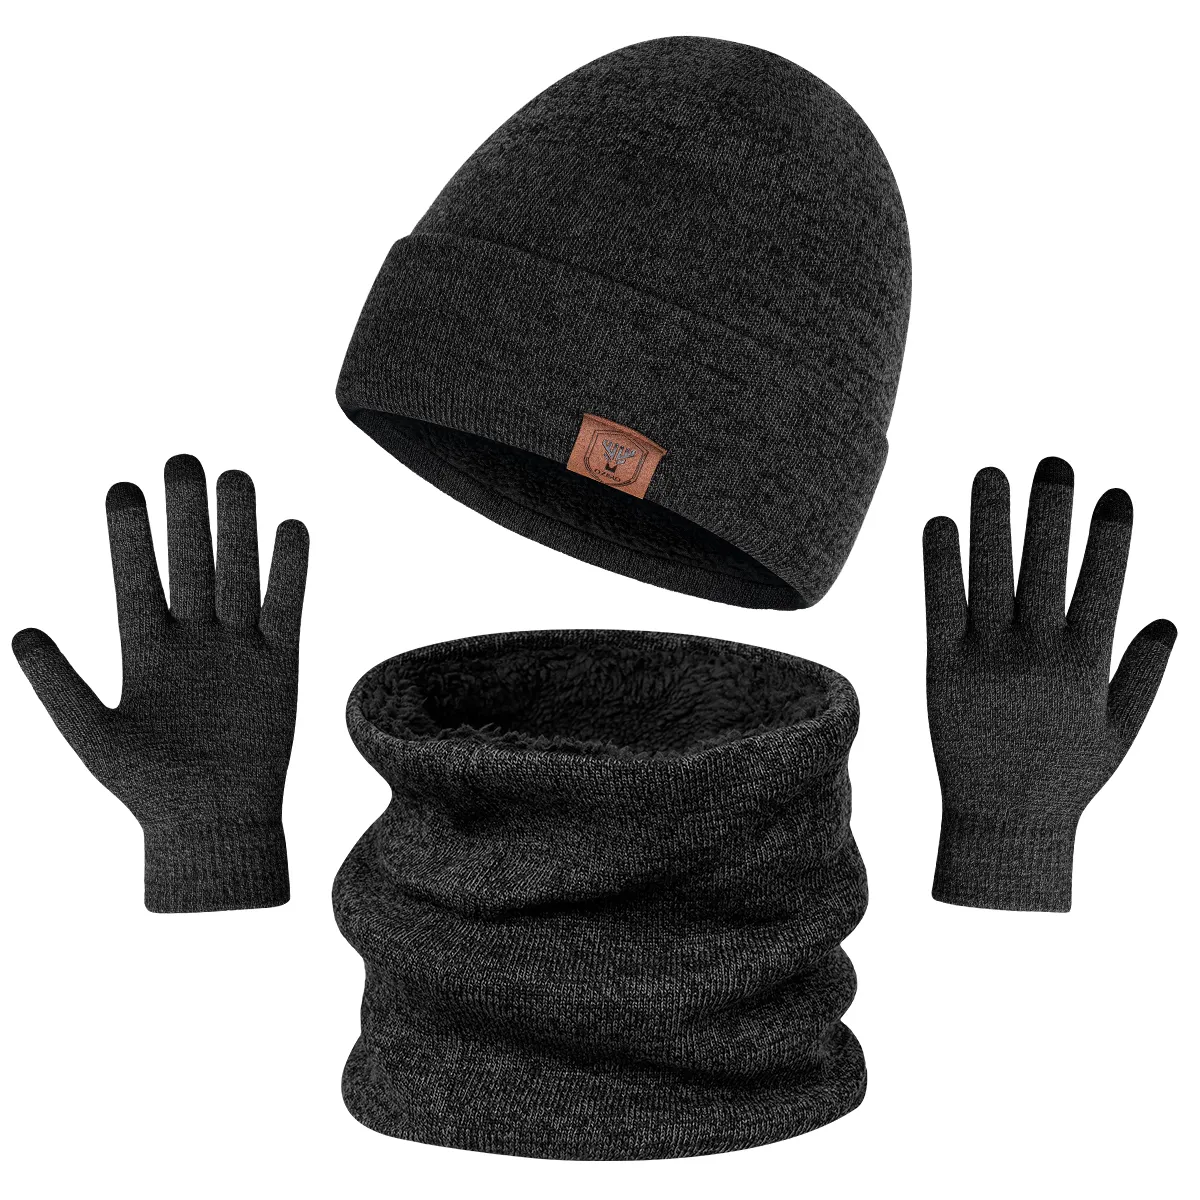 Ozero Wholesale Warm Winter Thick Knitted Beanie And Scarf For Men Knitting Hats And Gloves Sets